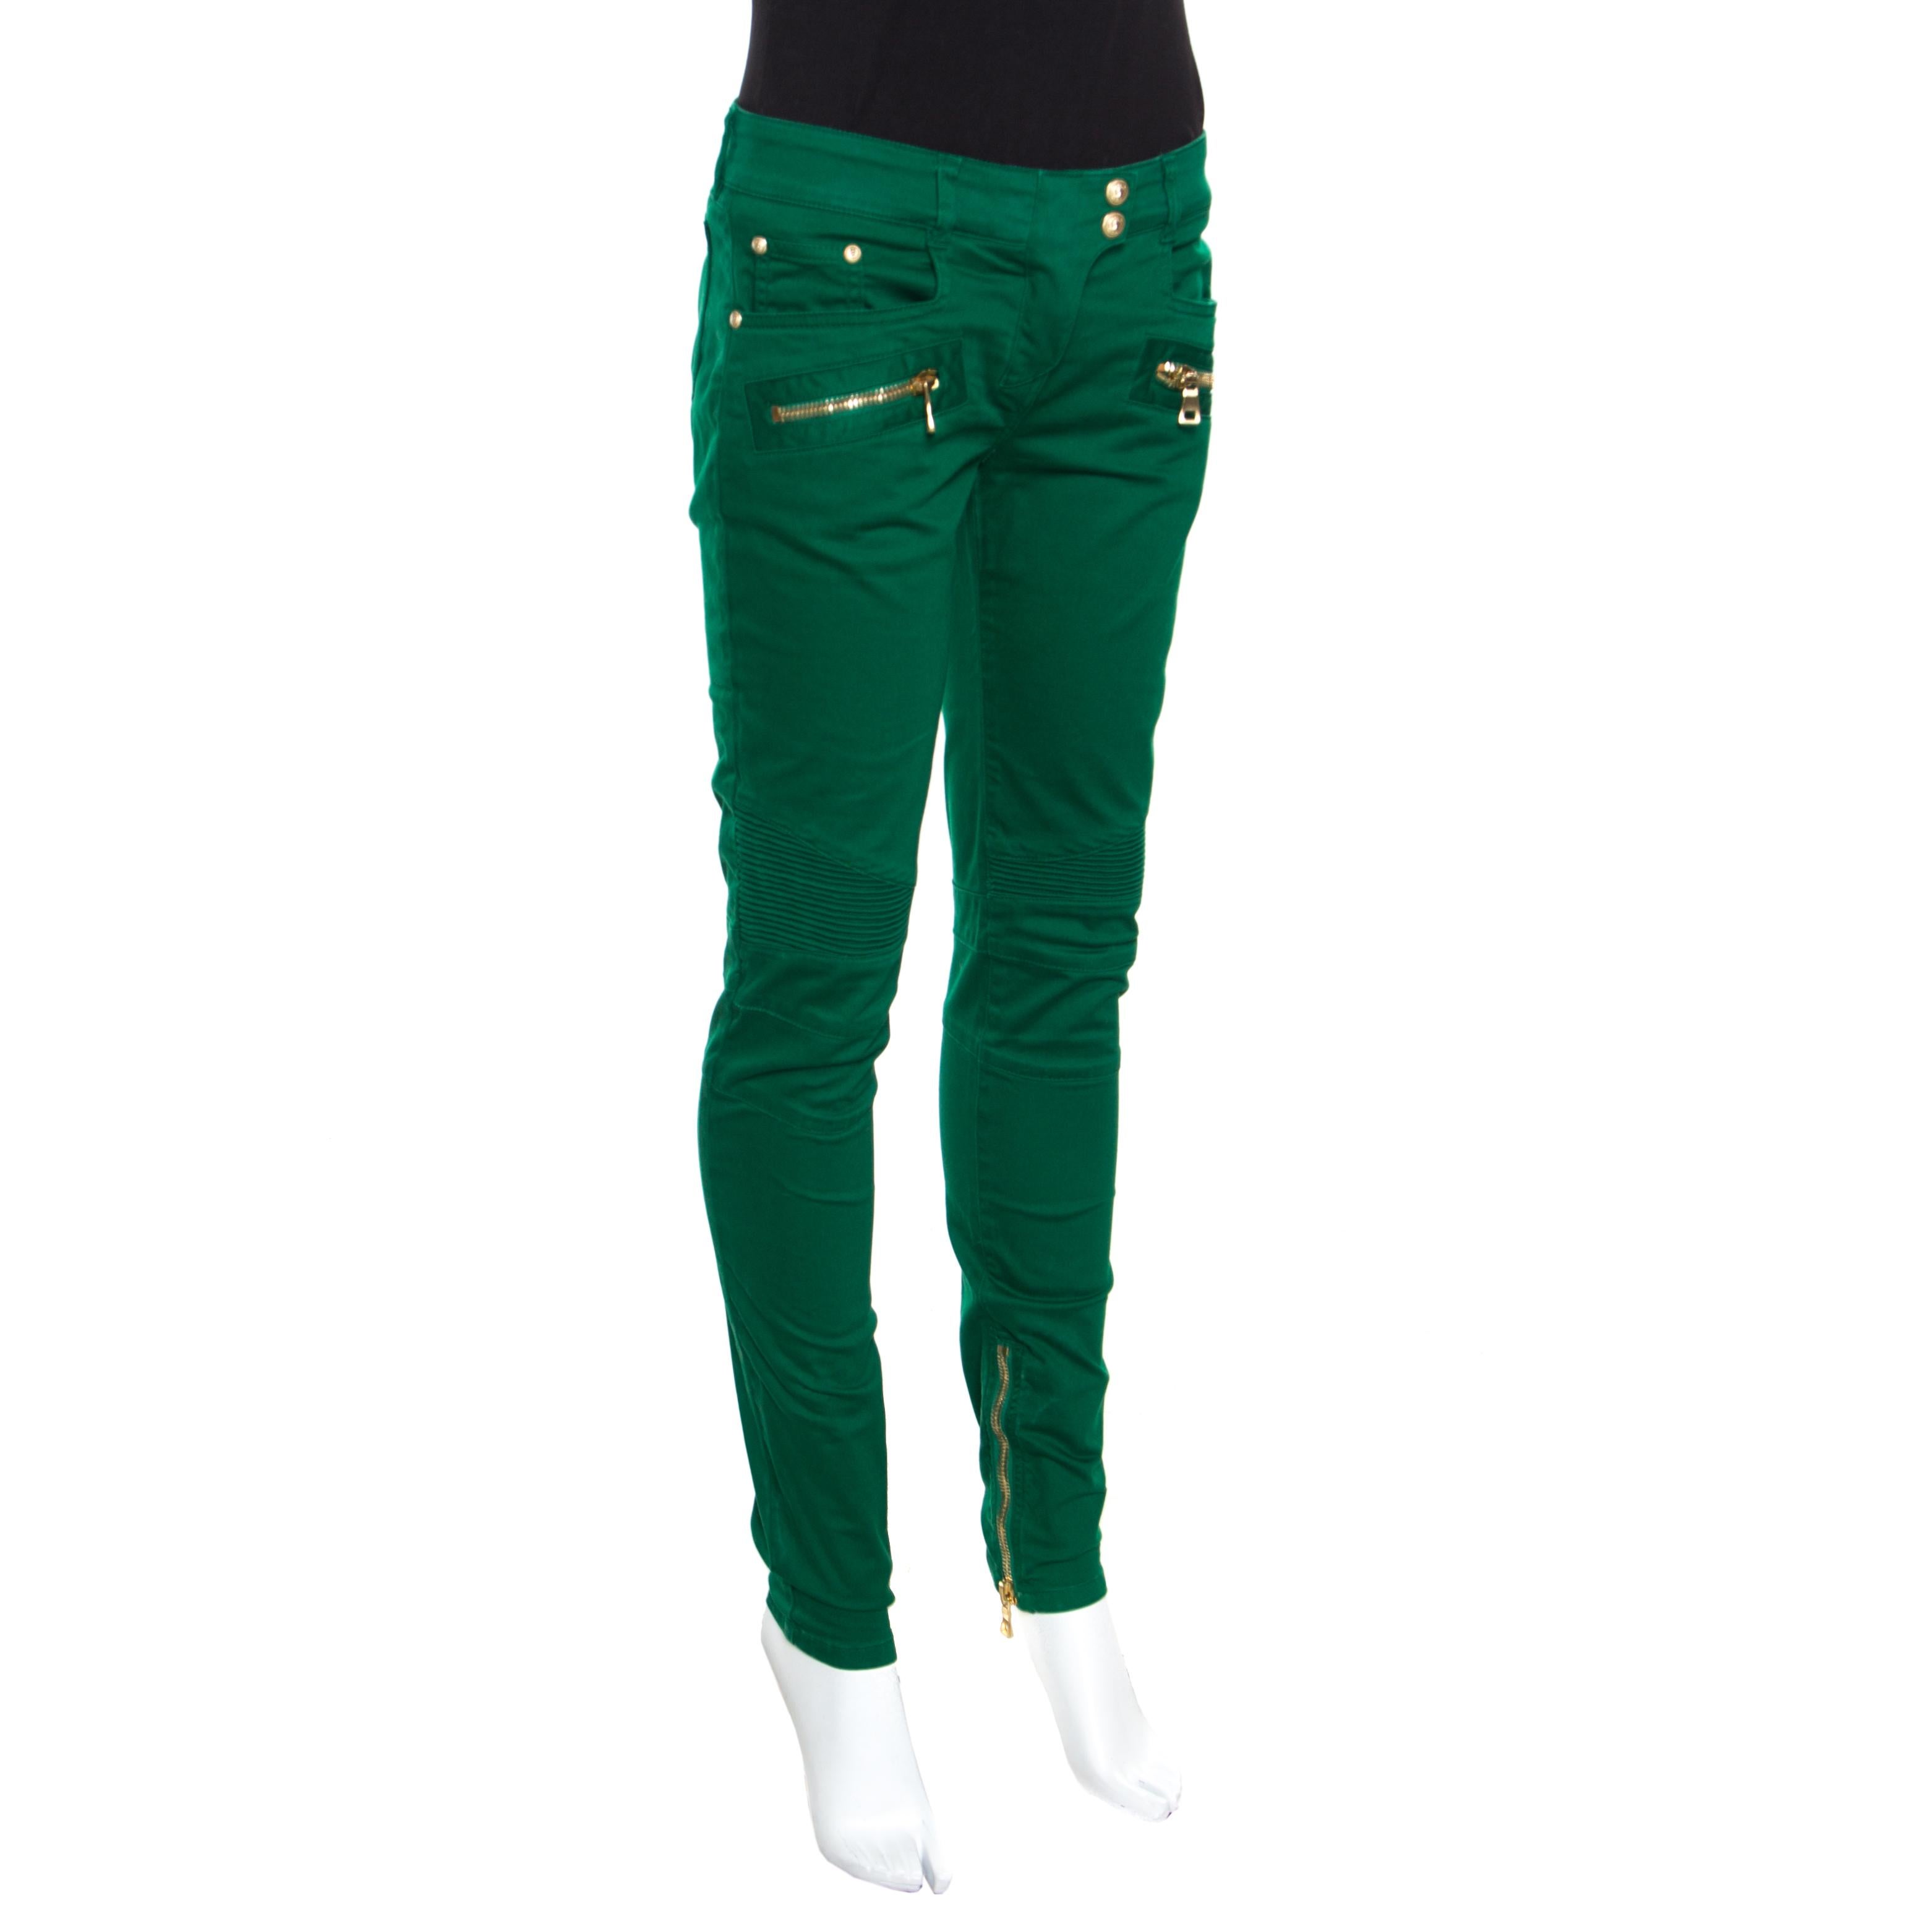 Wear these pretty jeans from Balmain every time you go for a casual outing. They are made of a cotton blend and offer a skinny fit. They look cool and will effortlessly complement your tops and blouses.

